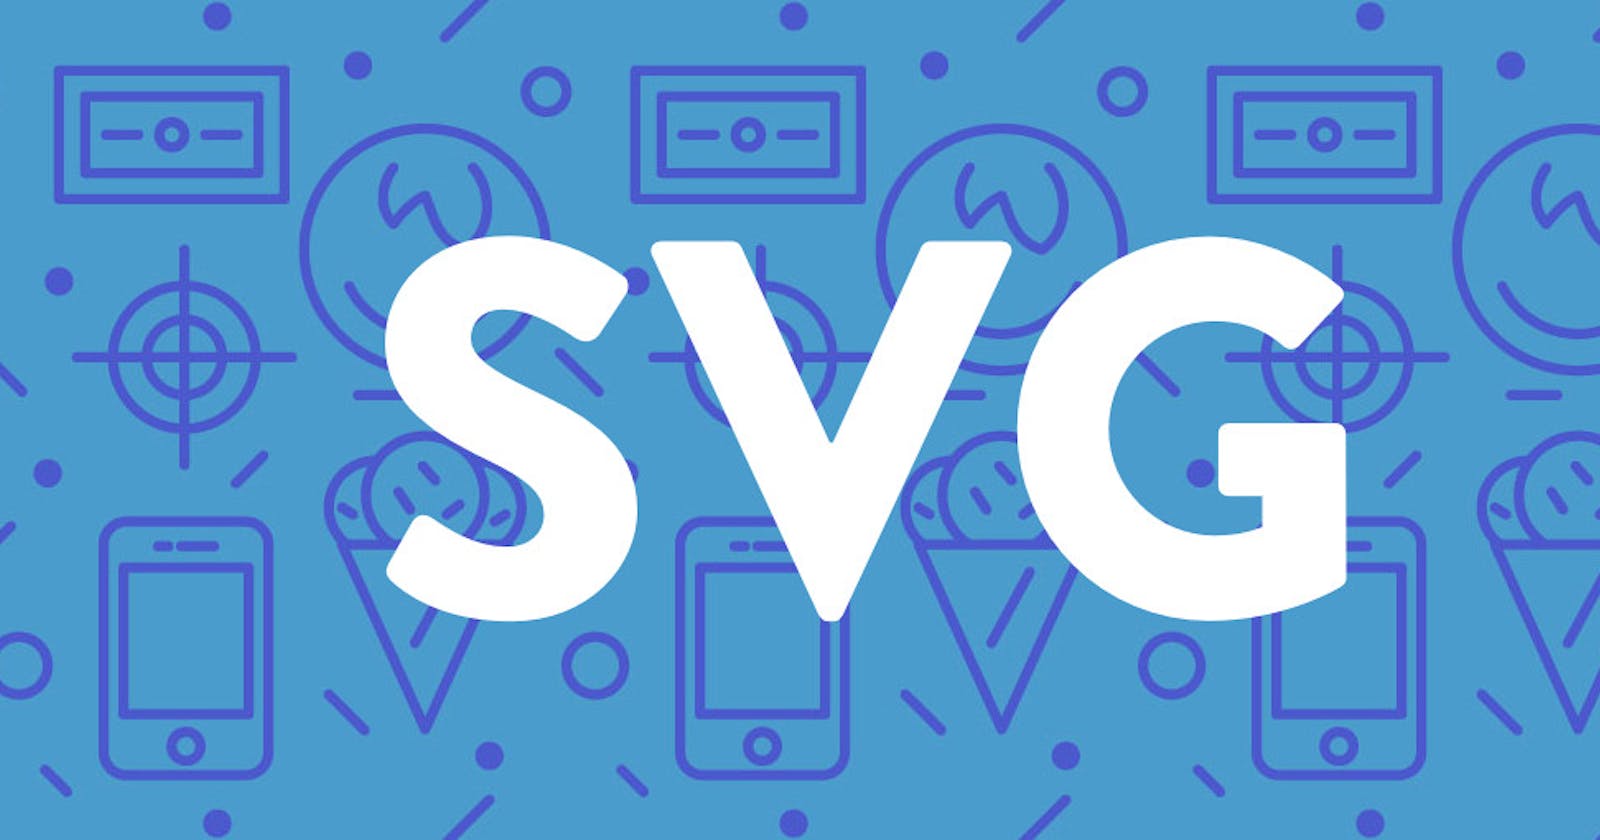 5 Reasons to Use SVG's in Your Next Project.